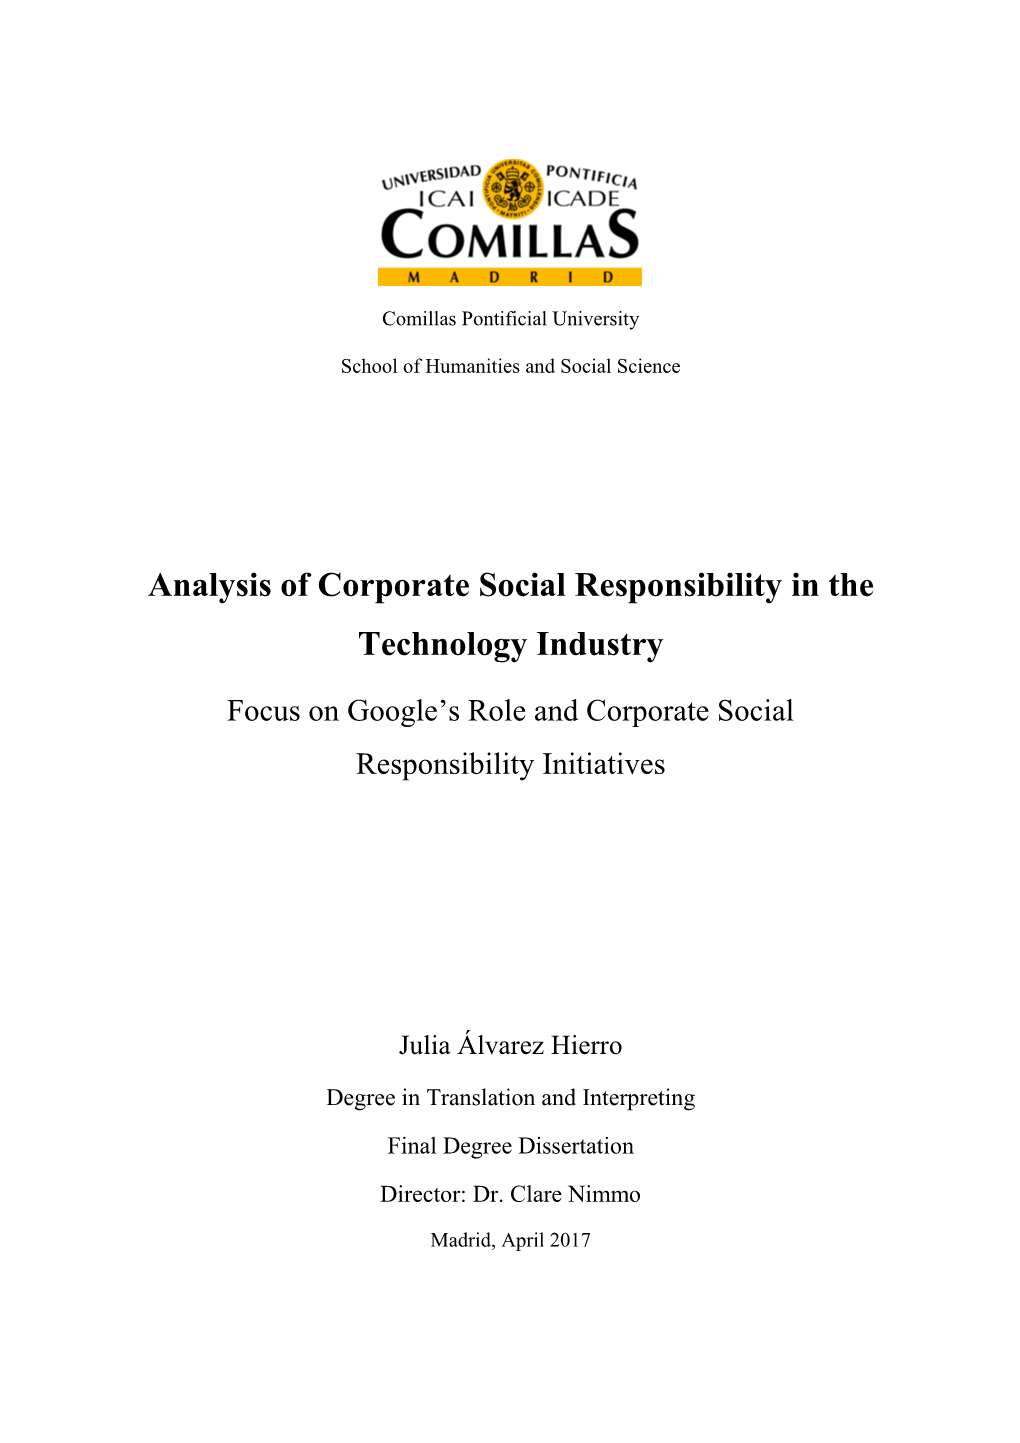 Analysis of Corporate Social Responsibility in the Technology Industry